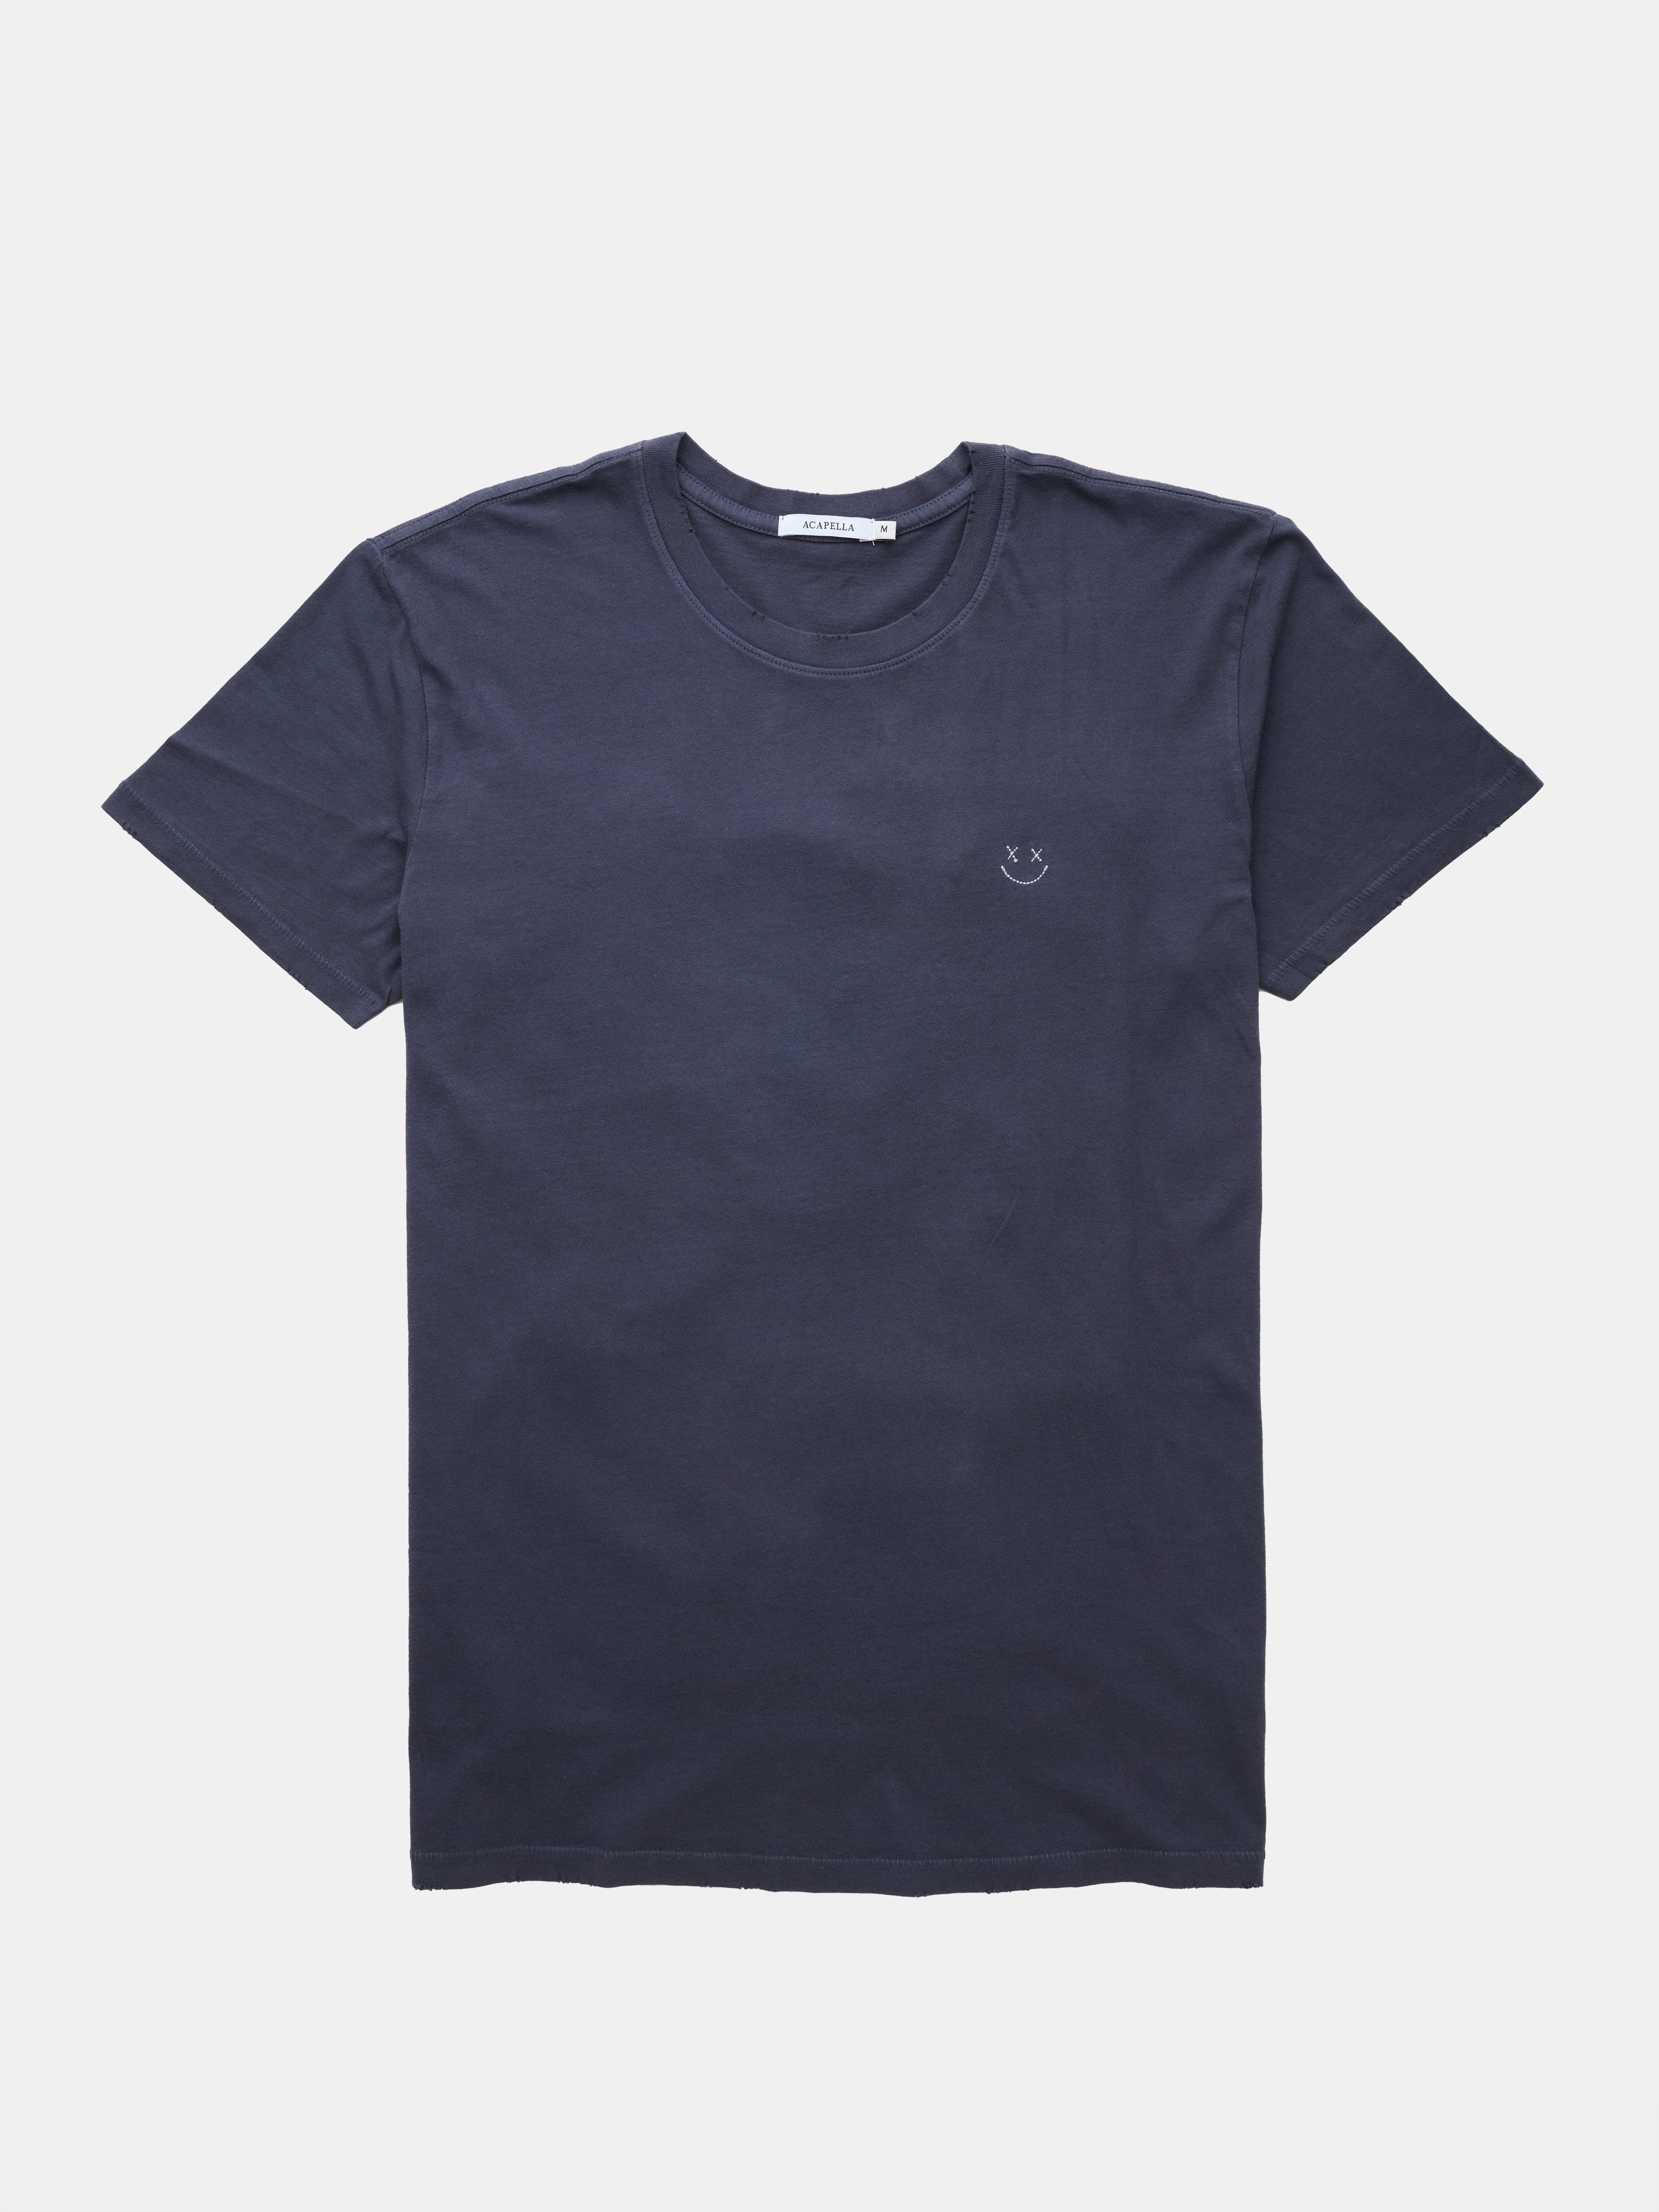 Distressed Smiley - Tee